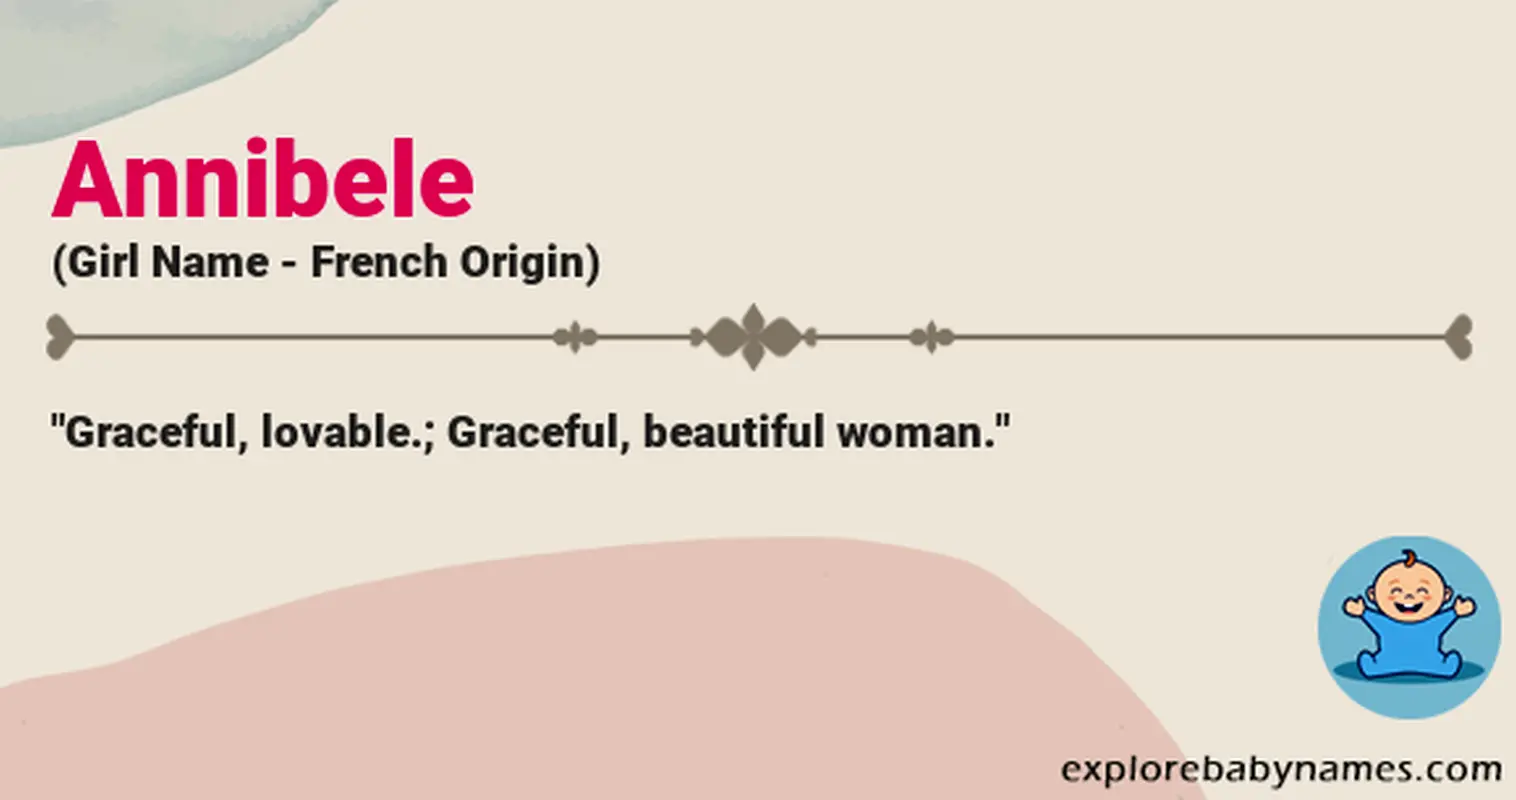 Meaning of Annibele